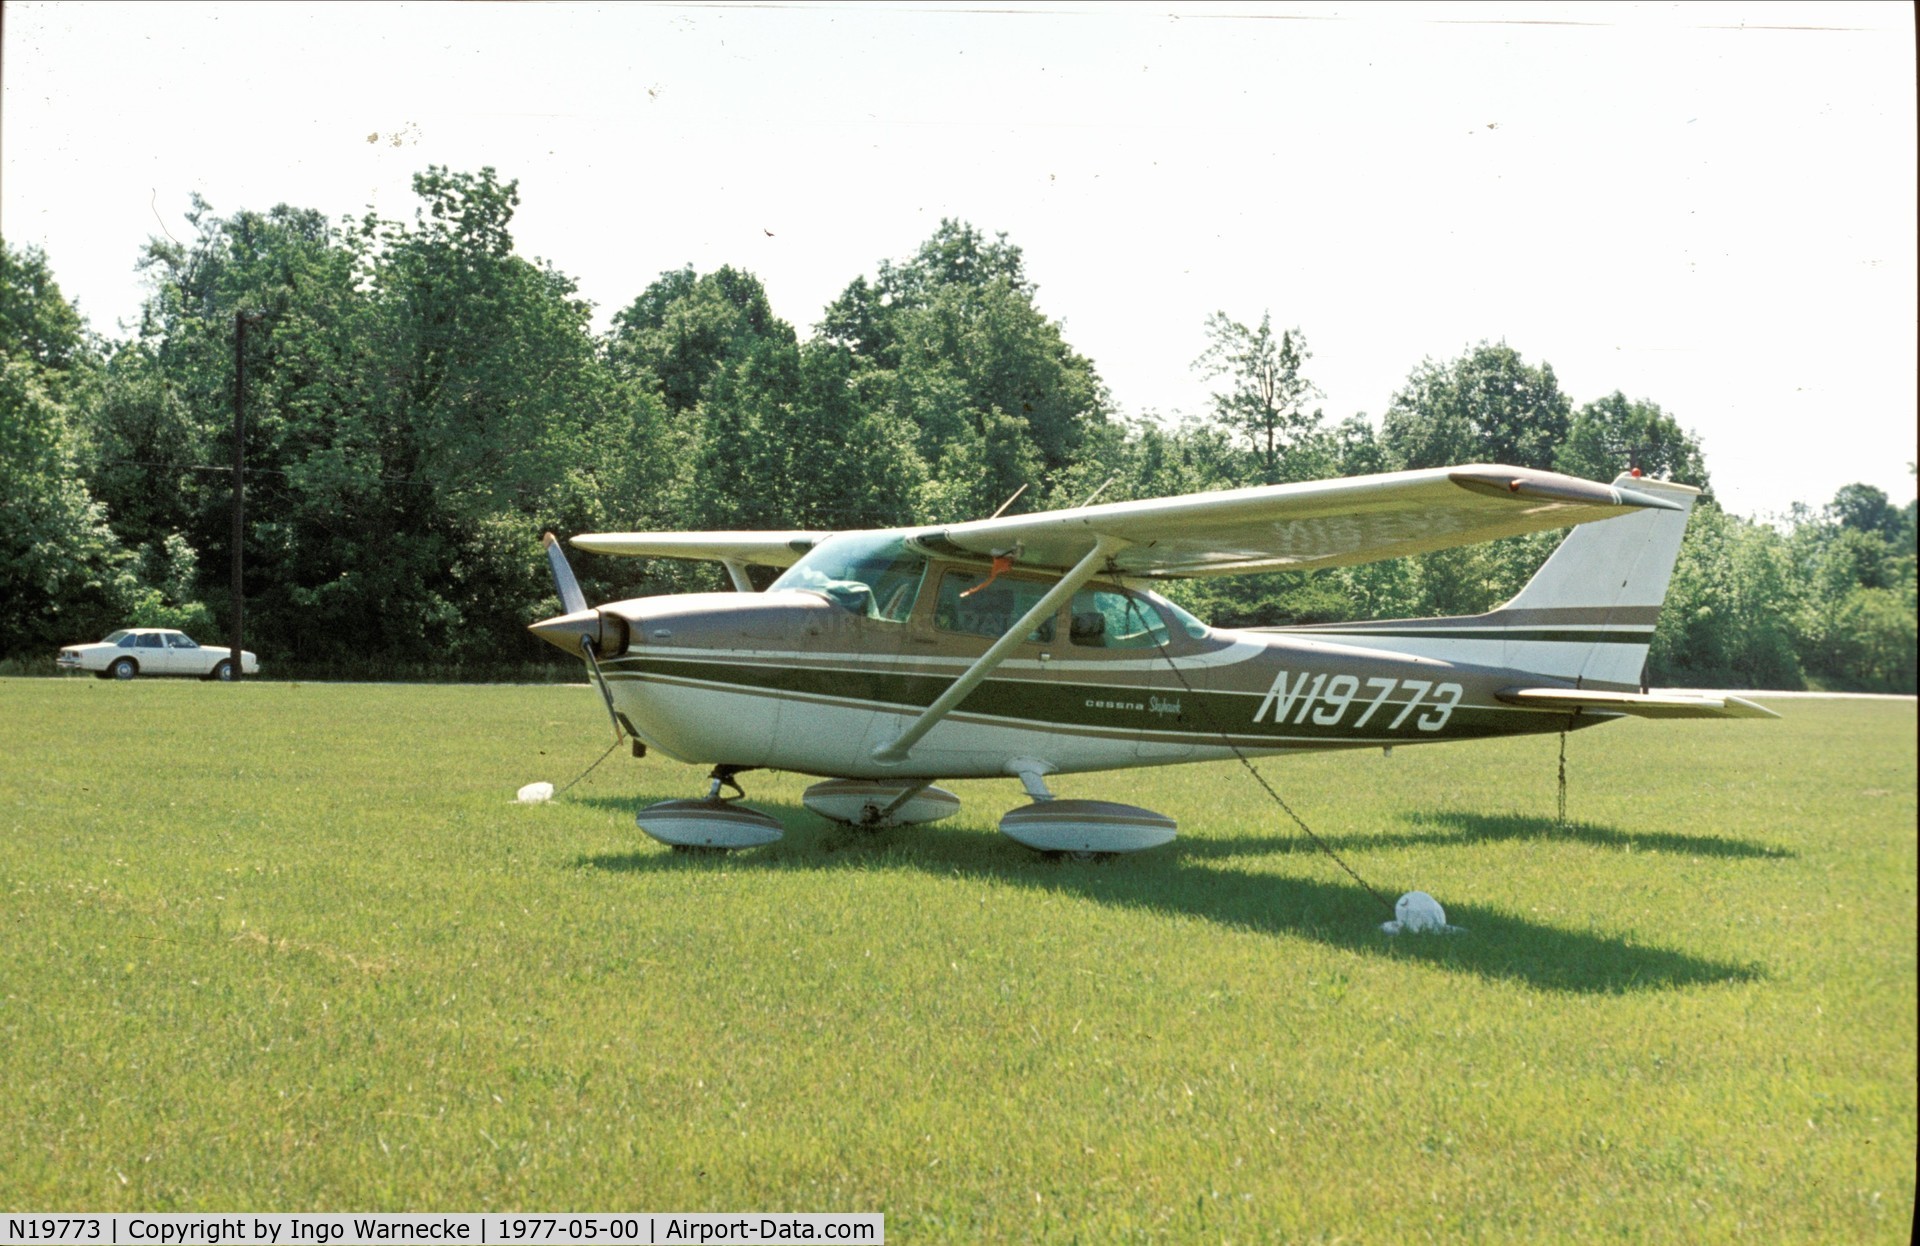 N19773, 1972 Cessna 172L C/N 17260740, Cessna 172L at a small airfield in Indianapolis